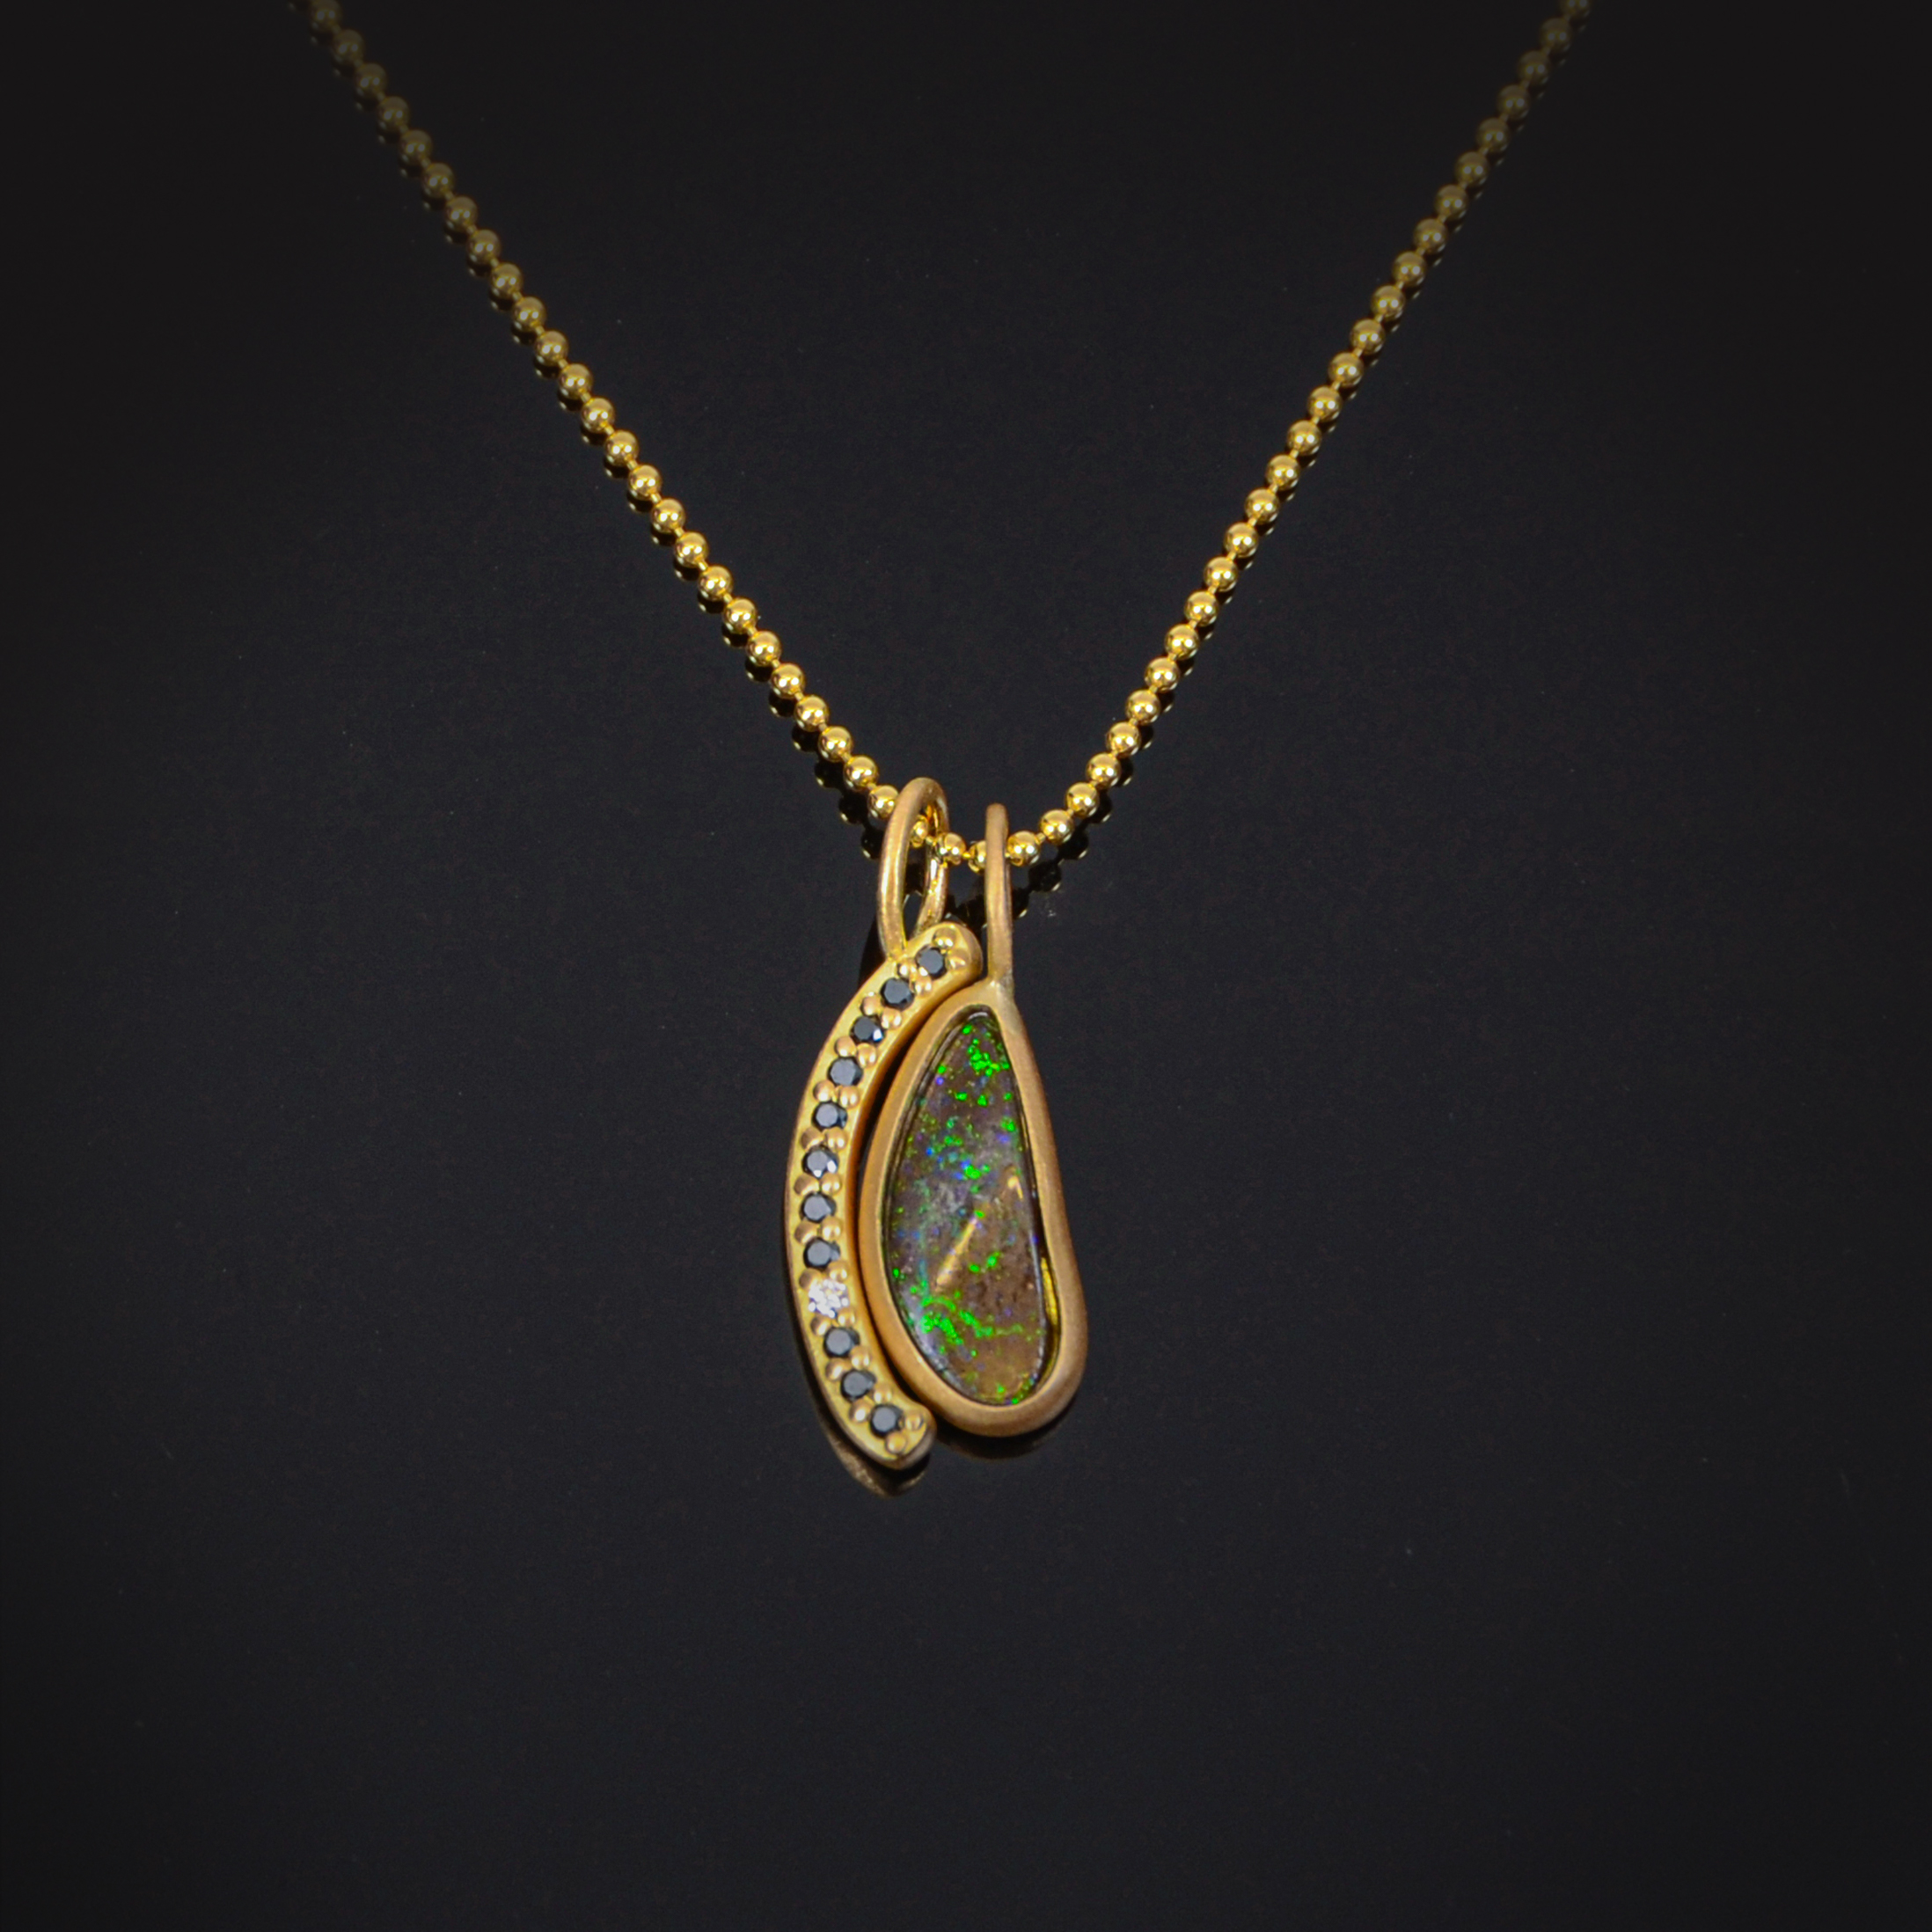 18K brushed yellow gold necklace with black and colorless Diamonds, Boulder Opal and Apatite and gold beads